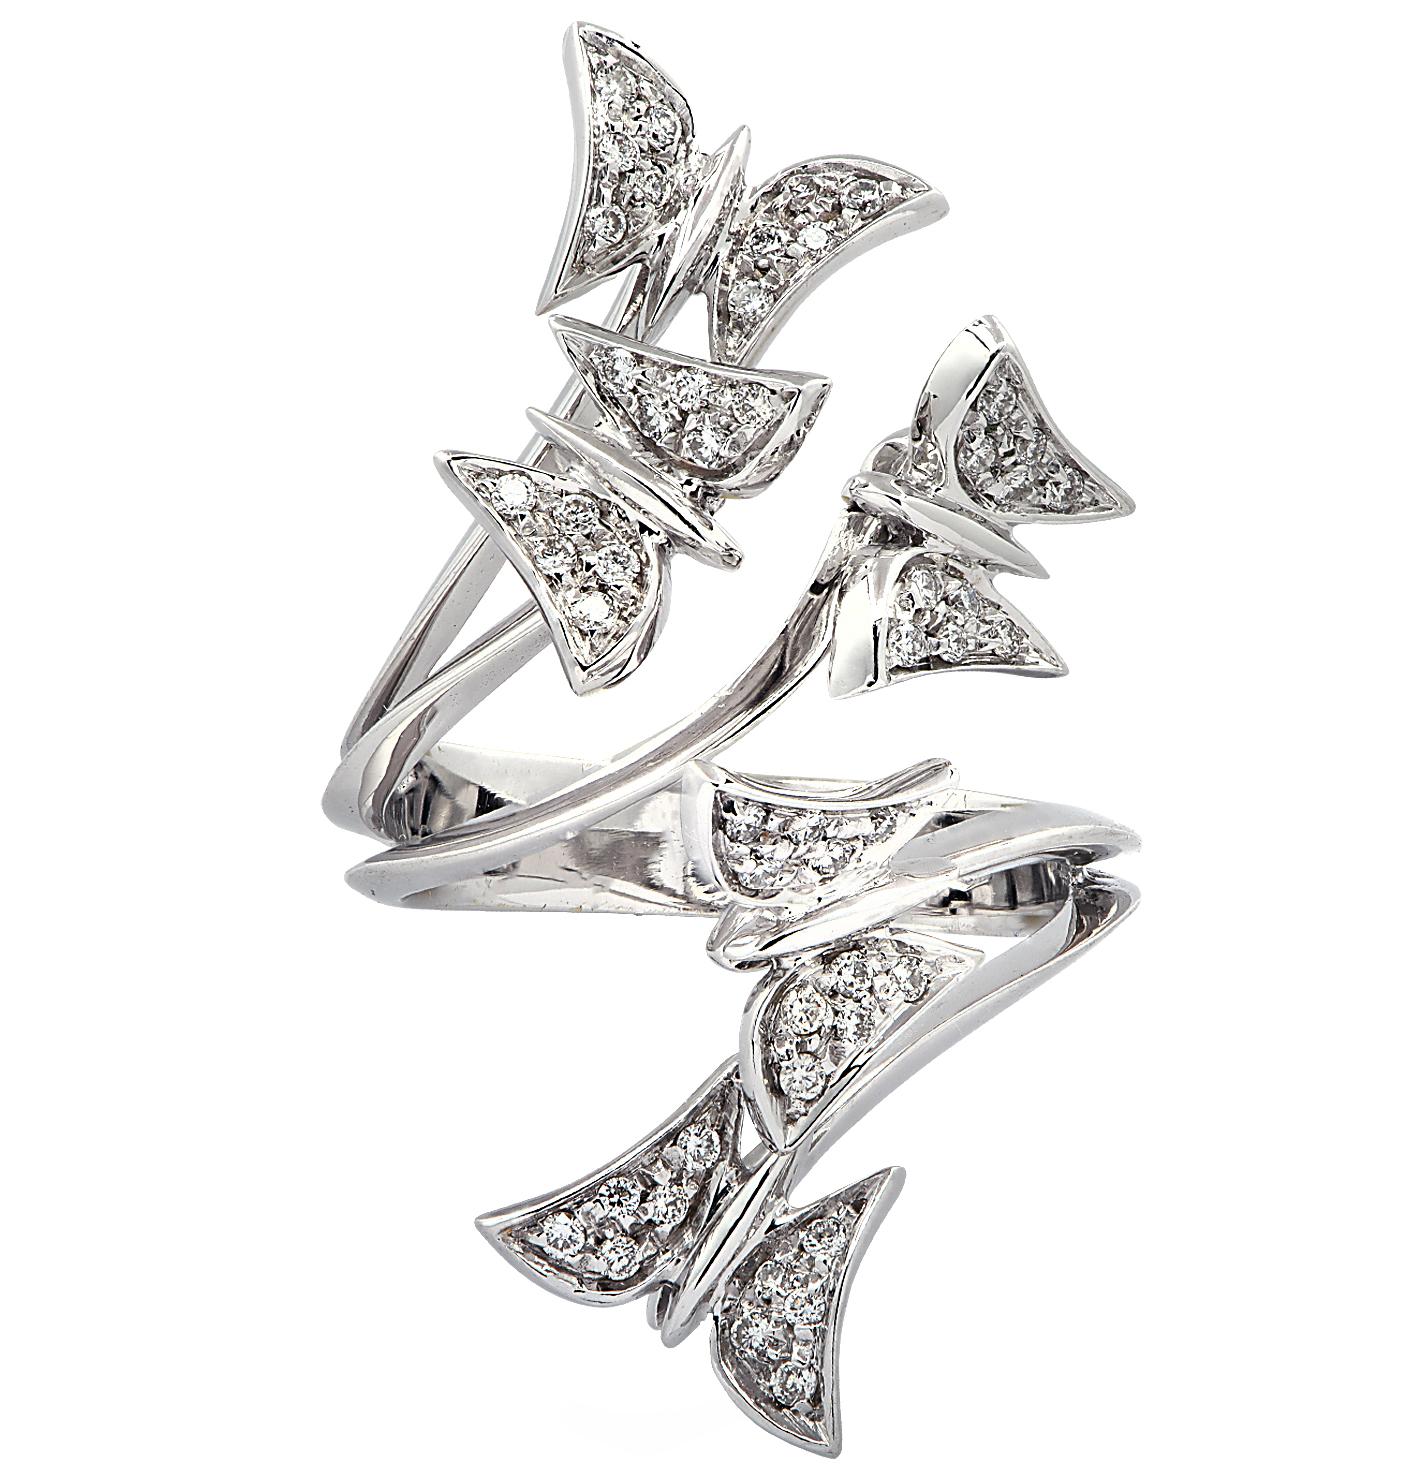 Enchanting ring crafted in 18 karat white gold, featuring 50 round brilliant cut diamonds weighing approximately 0.28 carats total, G color, VS-SI clarity. A flutter of butterflies, with diamond adorned wings,  fly in a graceful flight of fantasy